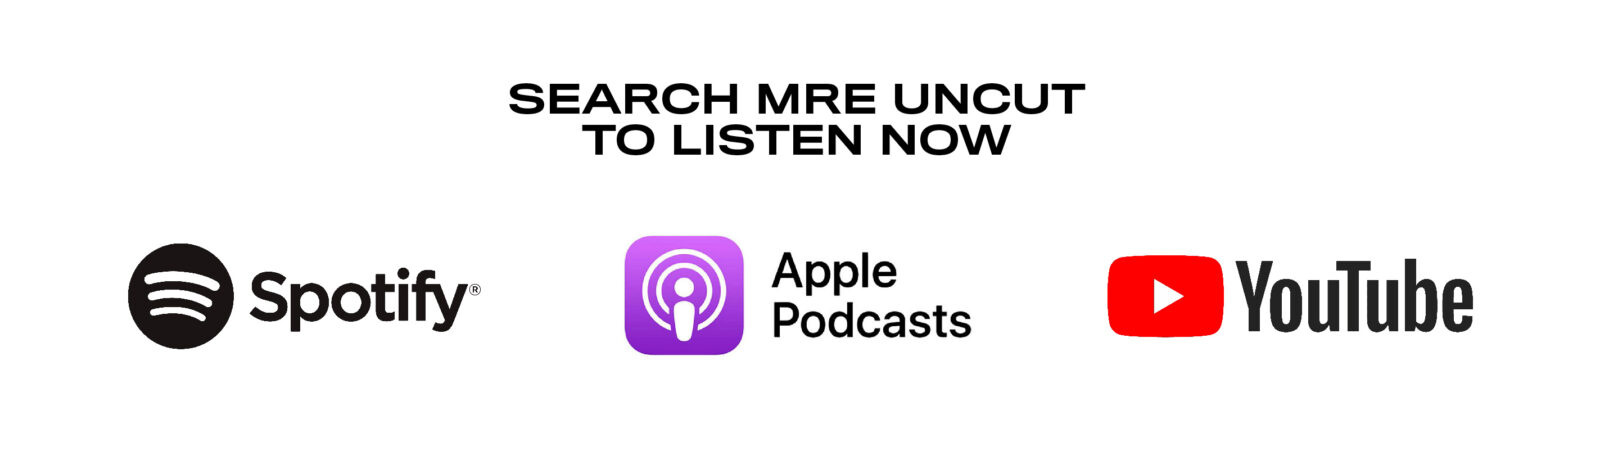 Search 'MRE Uncut' to listen now